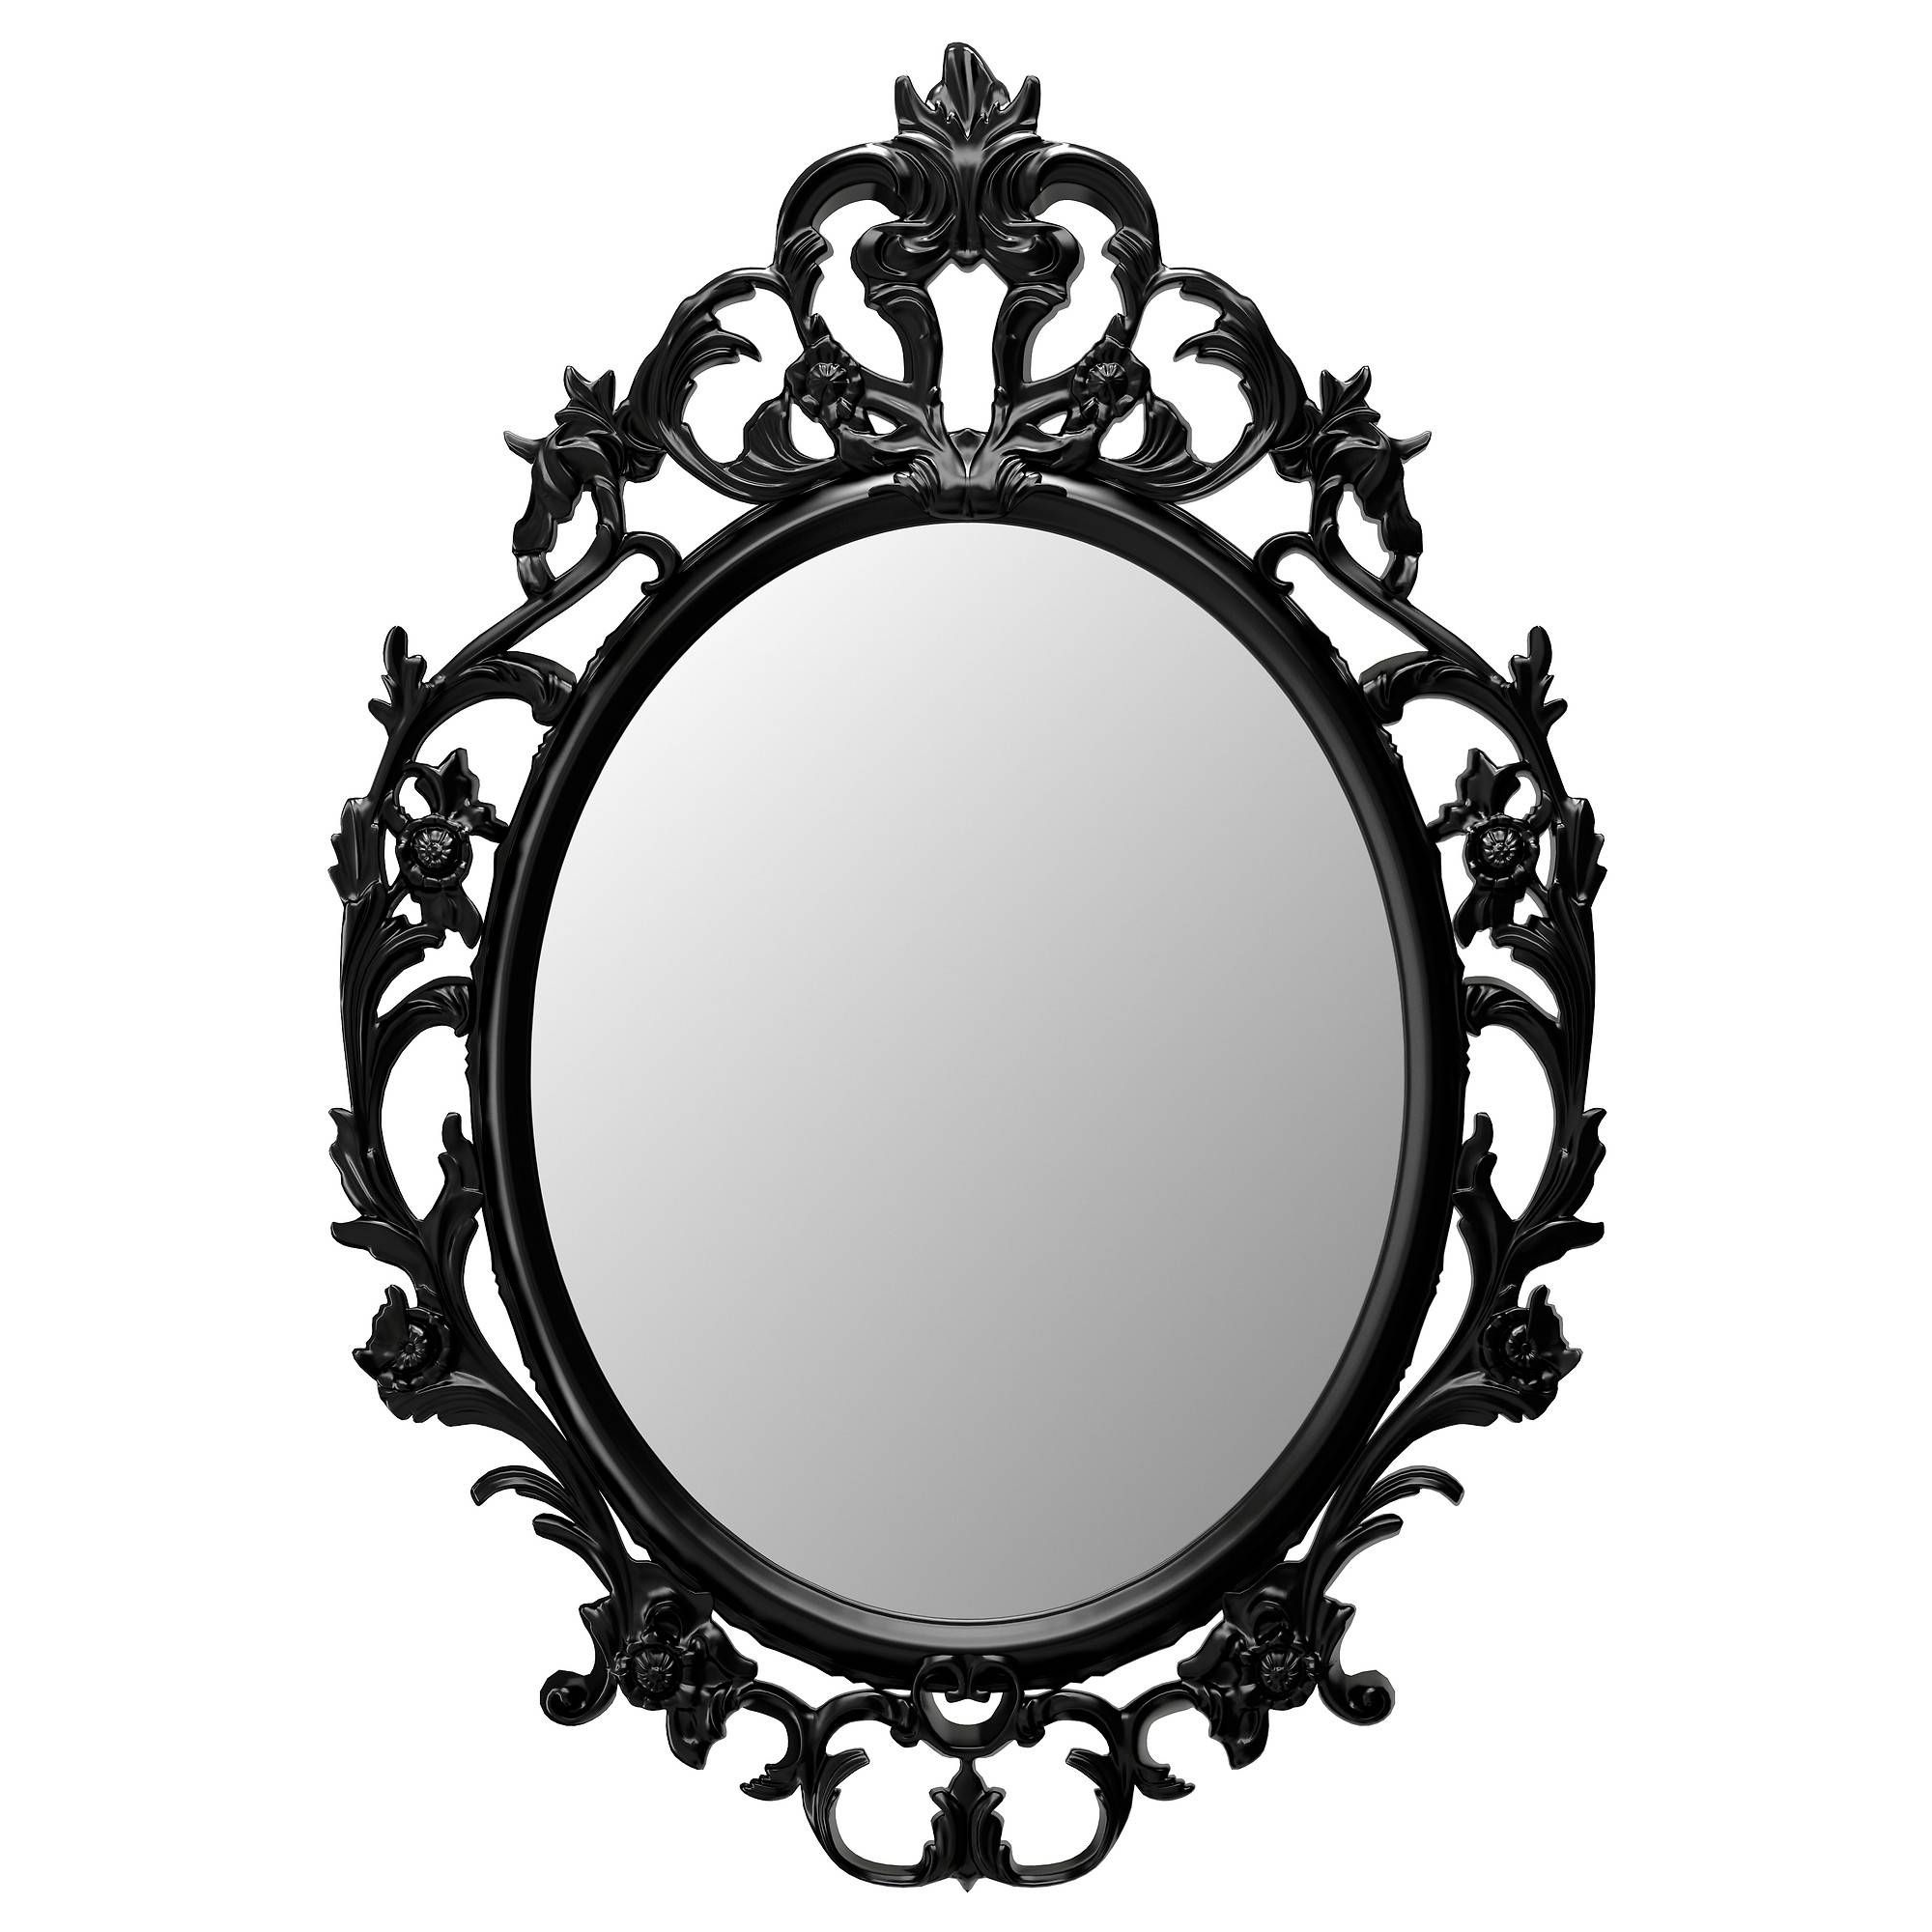 Ung Drill Mirror – Ikea In Ornate Oval Mirrors (View 3 of 25)